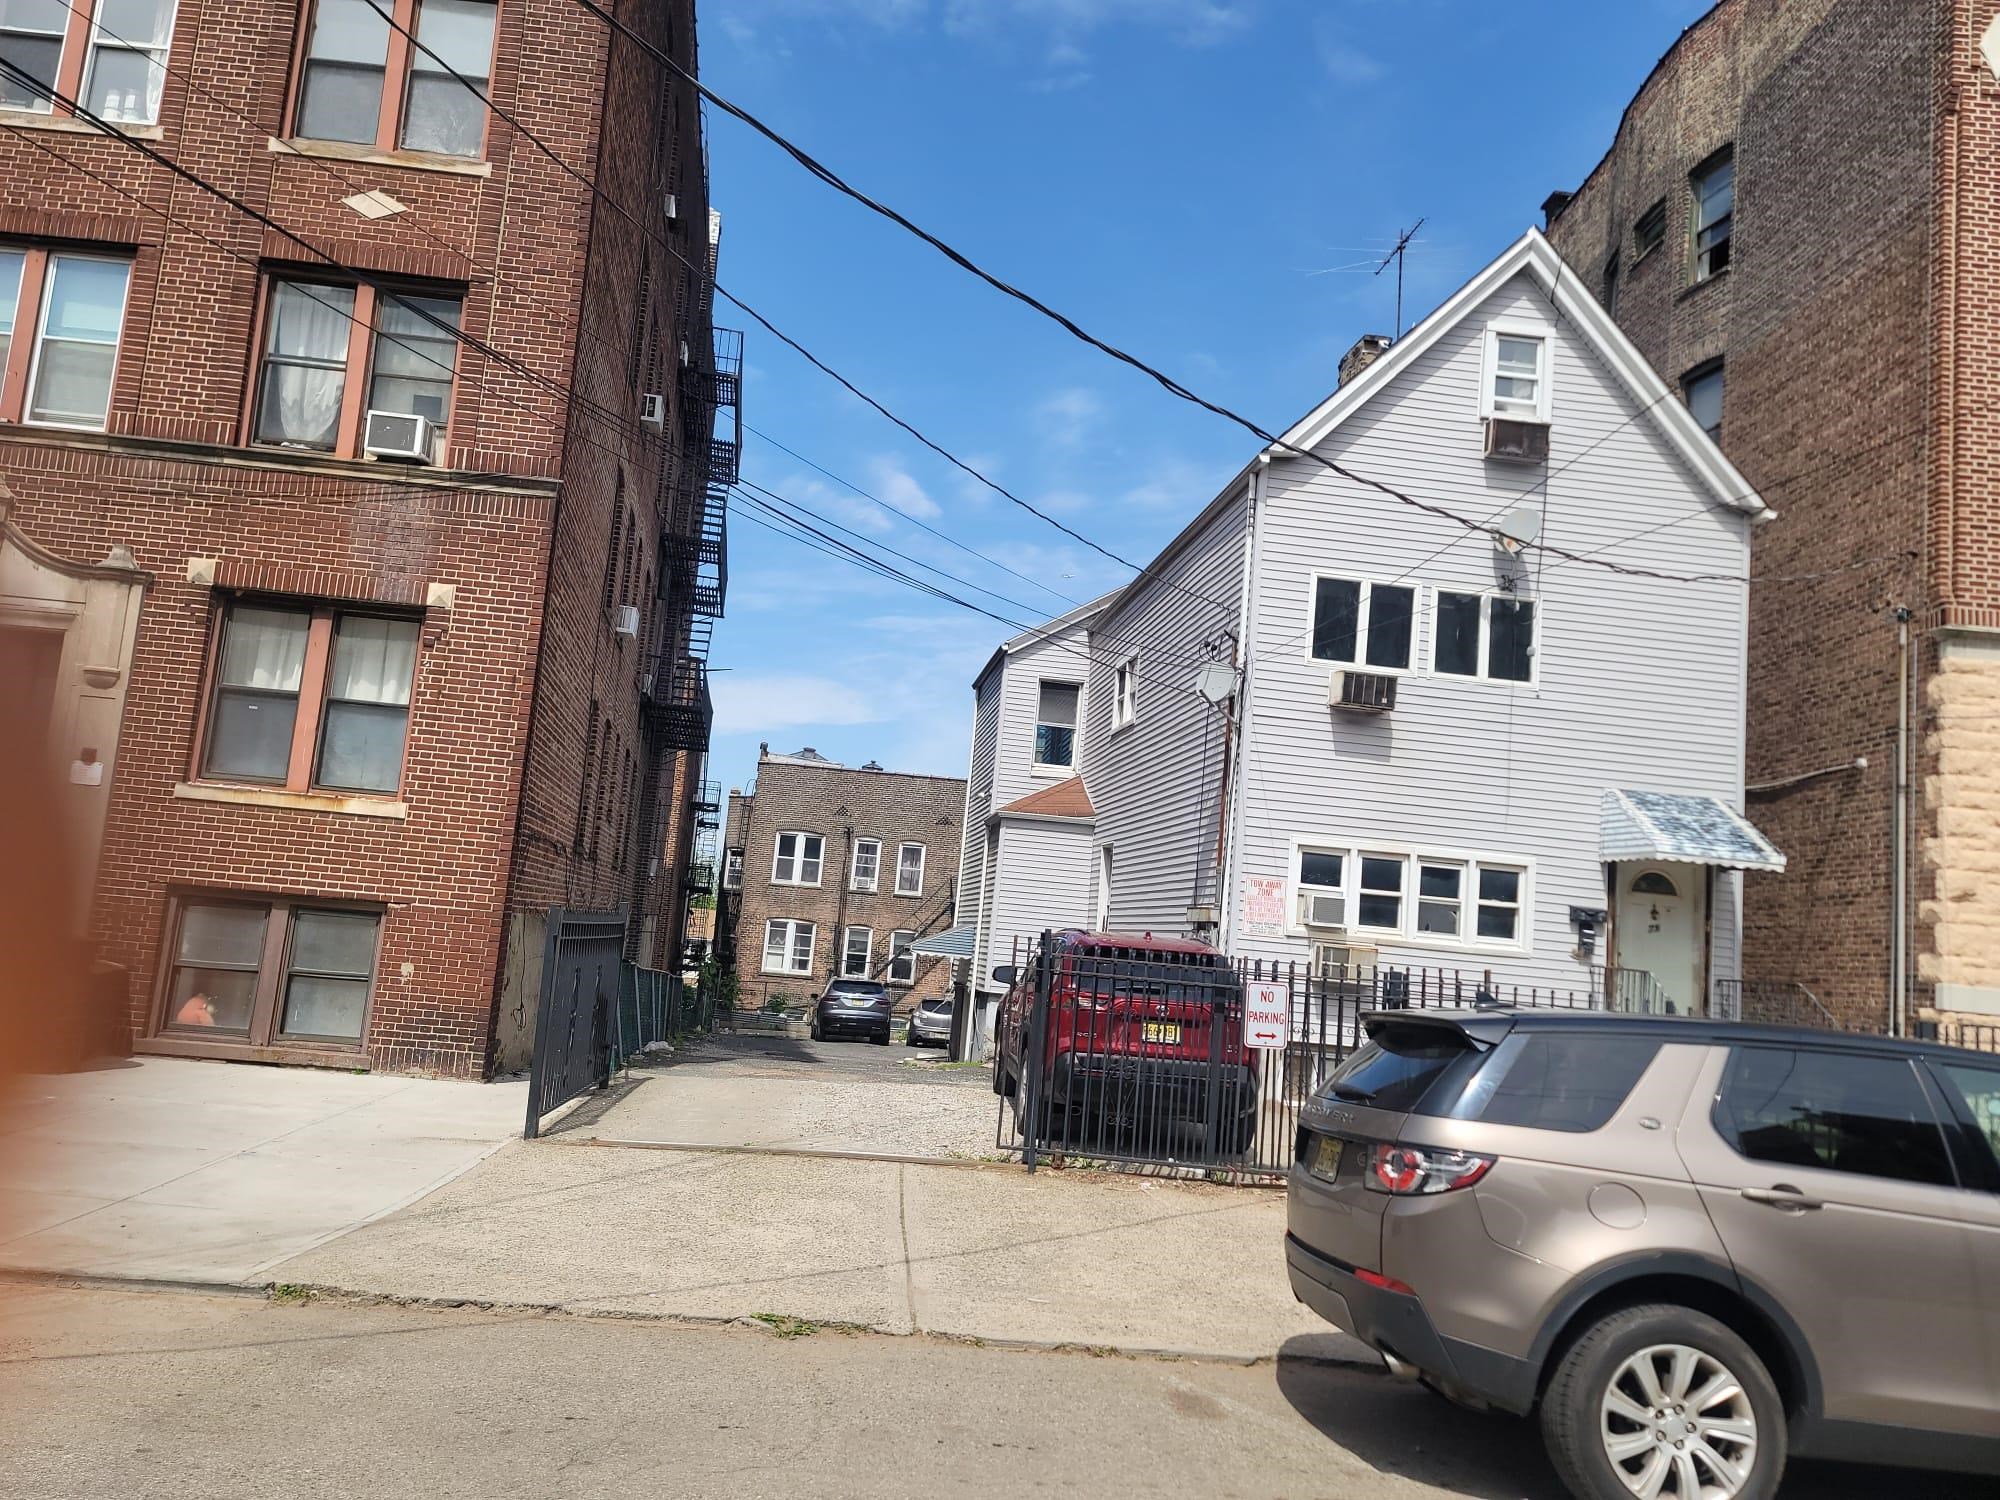 # 240006370 - For Rent in JERSEY CITY - Journal Square NJ